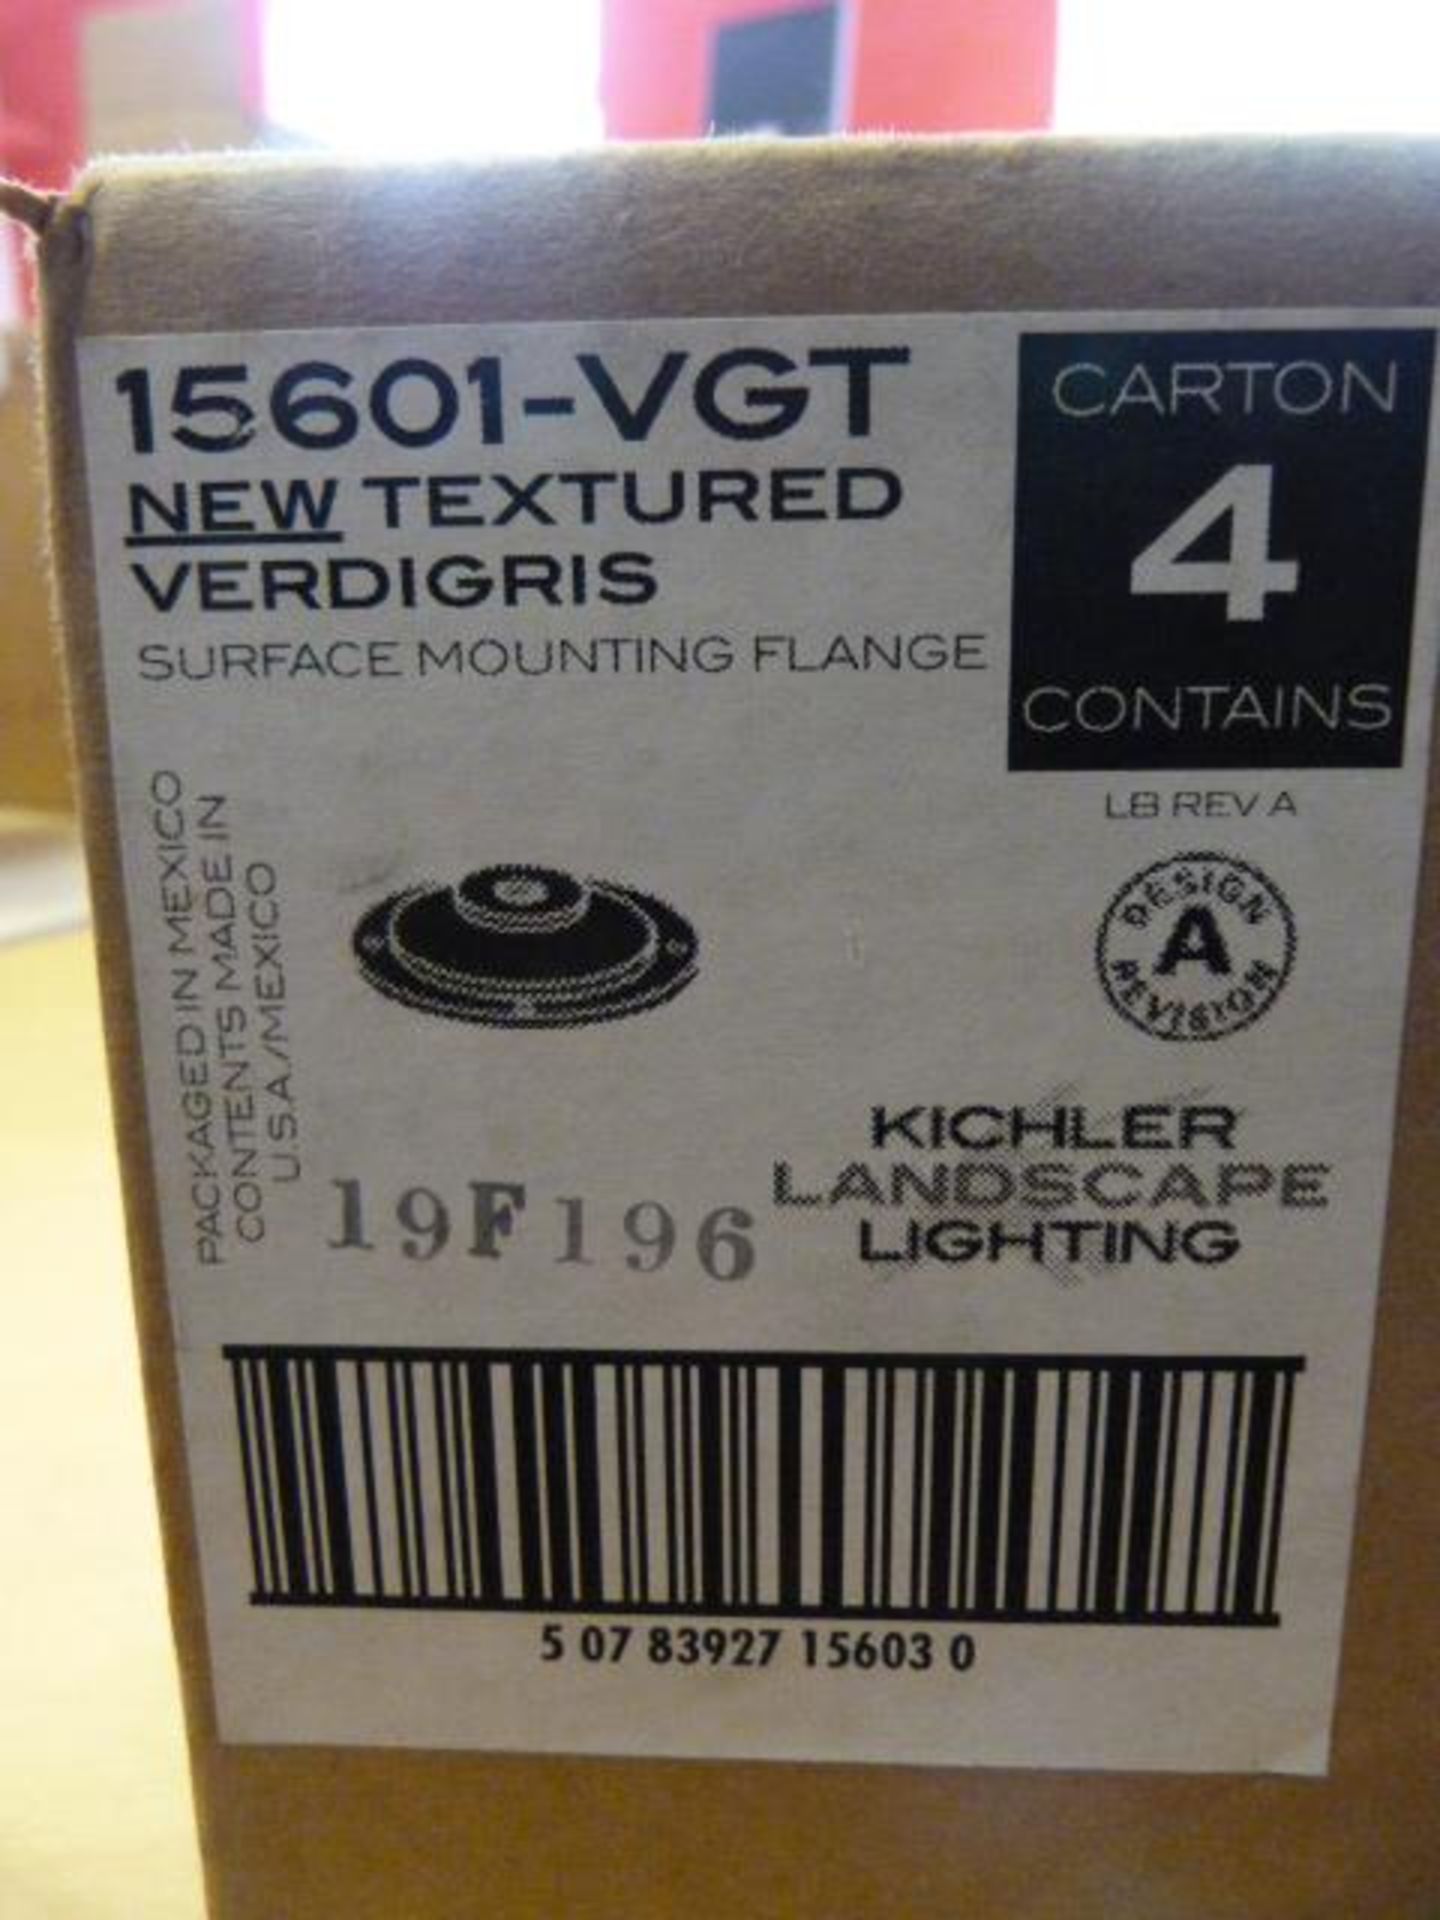 *Box of Four 15601-VGT Textured Verdigris Surface Mounting Flanges - Image 2 of 2